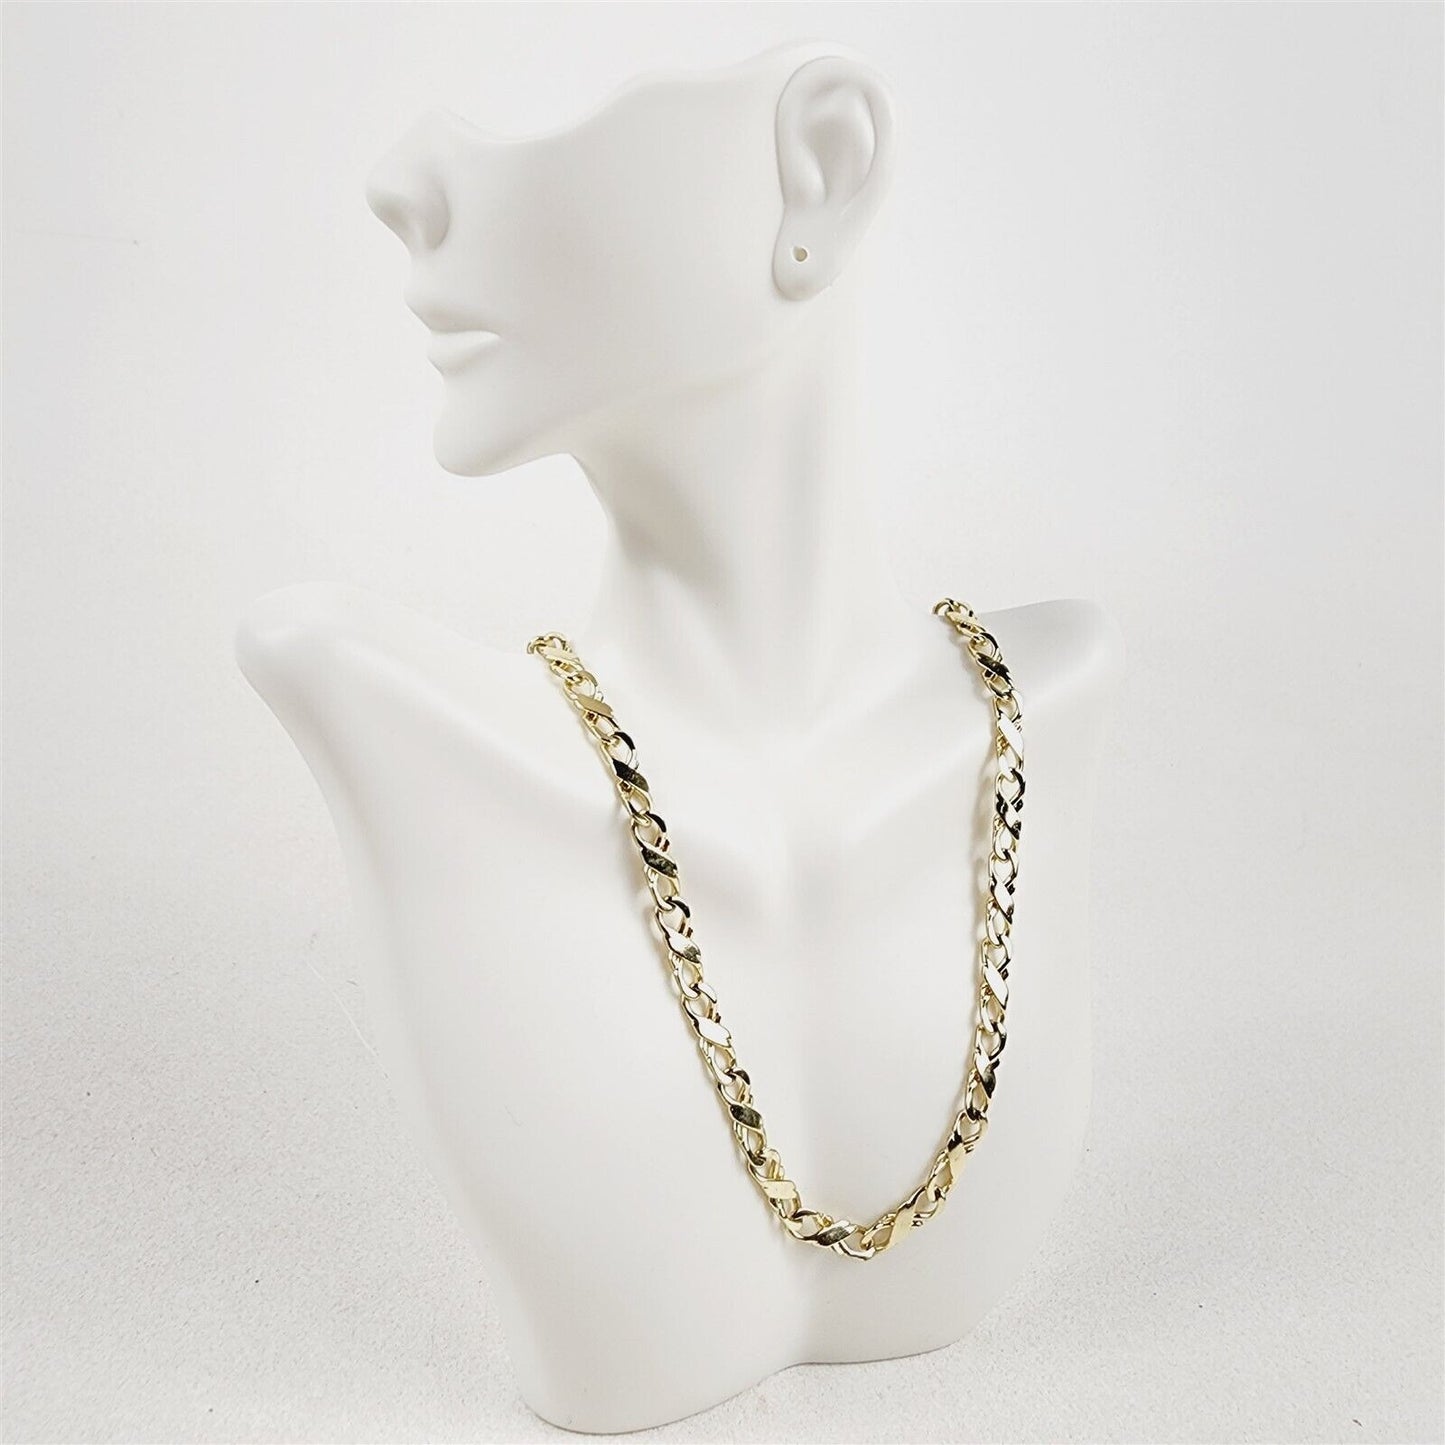 14K Gold Plated Necklace Infinity Link Chain - 17"